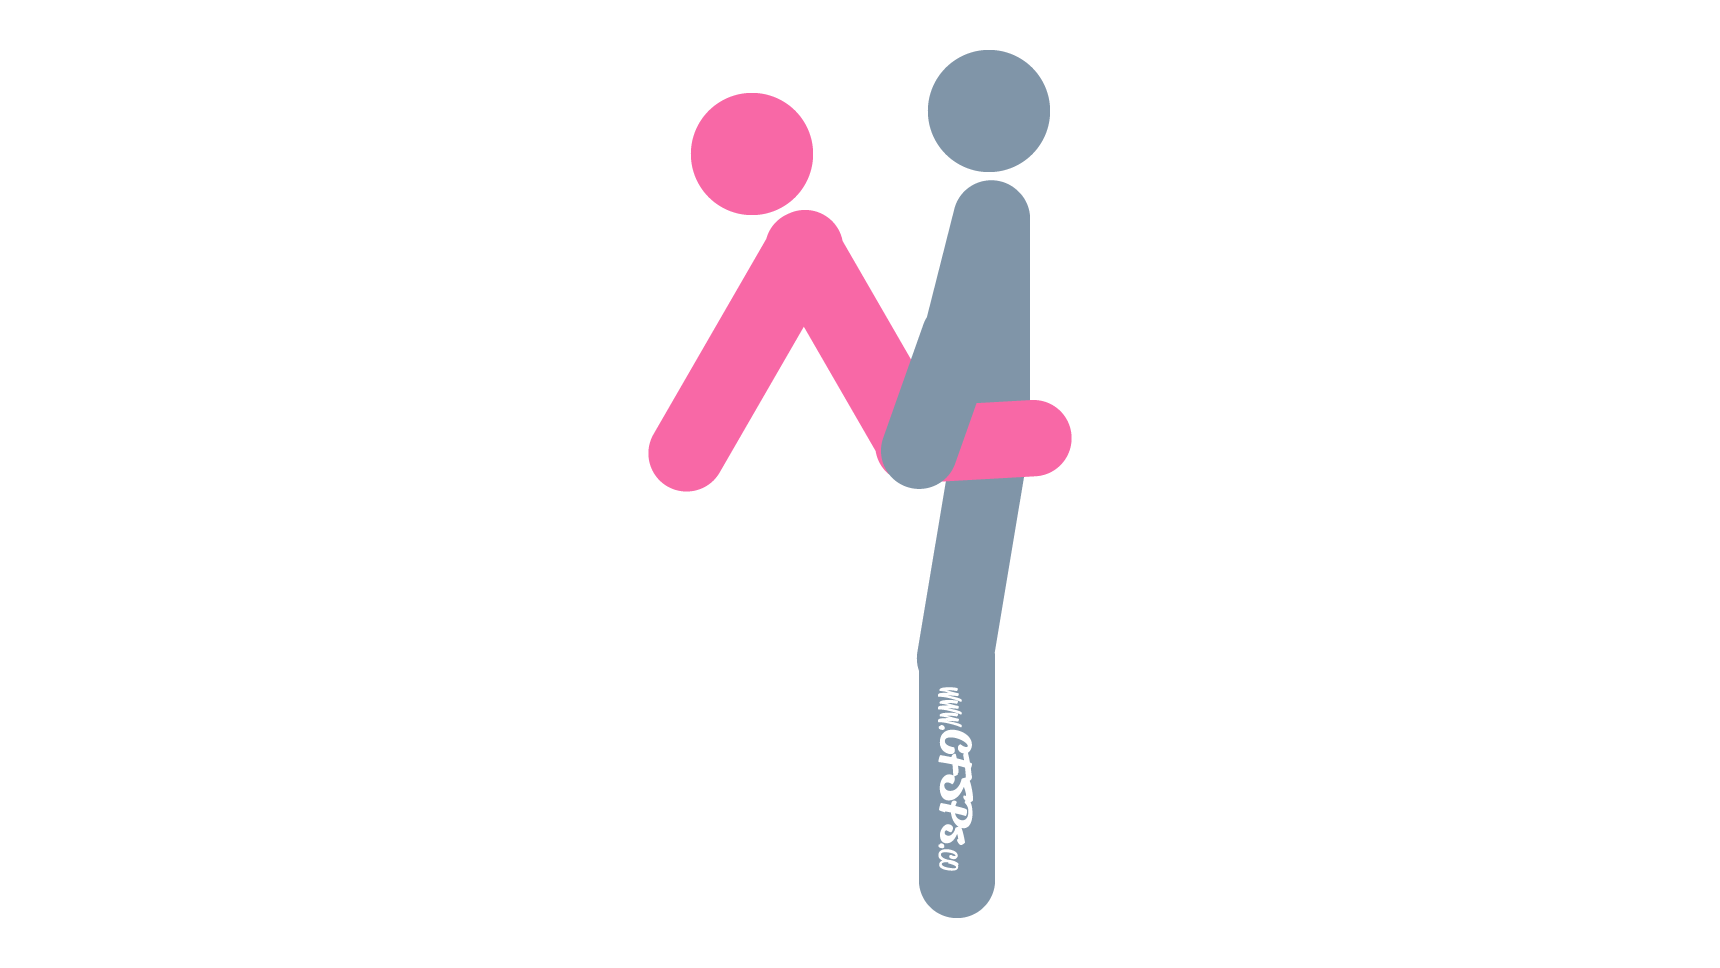 This stick figure image depicts a man and woman having sex in the Padlock sex position. The woman is sitting on the edge of a table with her arms supporting her upper body behind her. The man is standing before her, and her legs are wrapped around his pelvis.